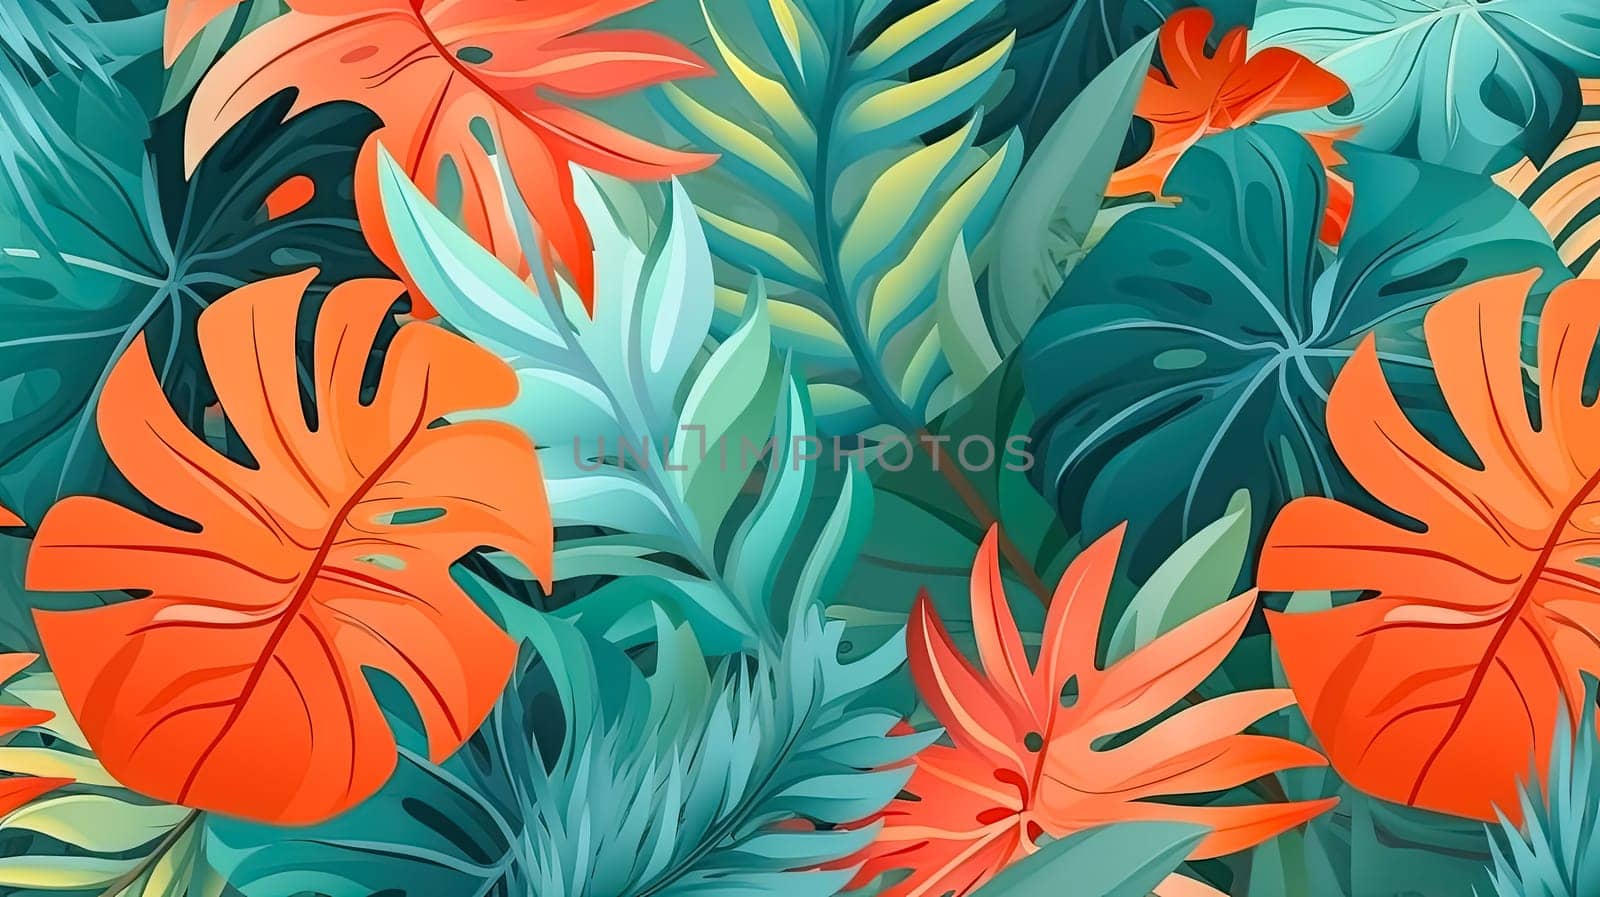 Summer serenity A Monstera leaf gracefully poised, encapsulating the essence of summer days. Perfect for creating a soothing summer-themed background.